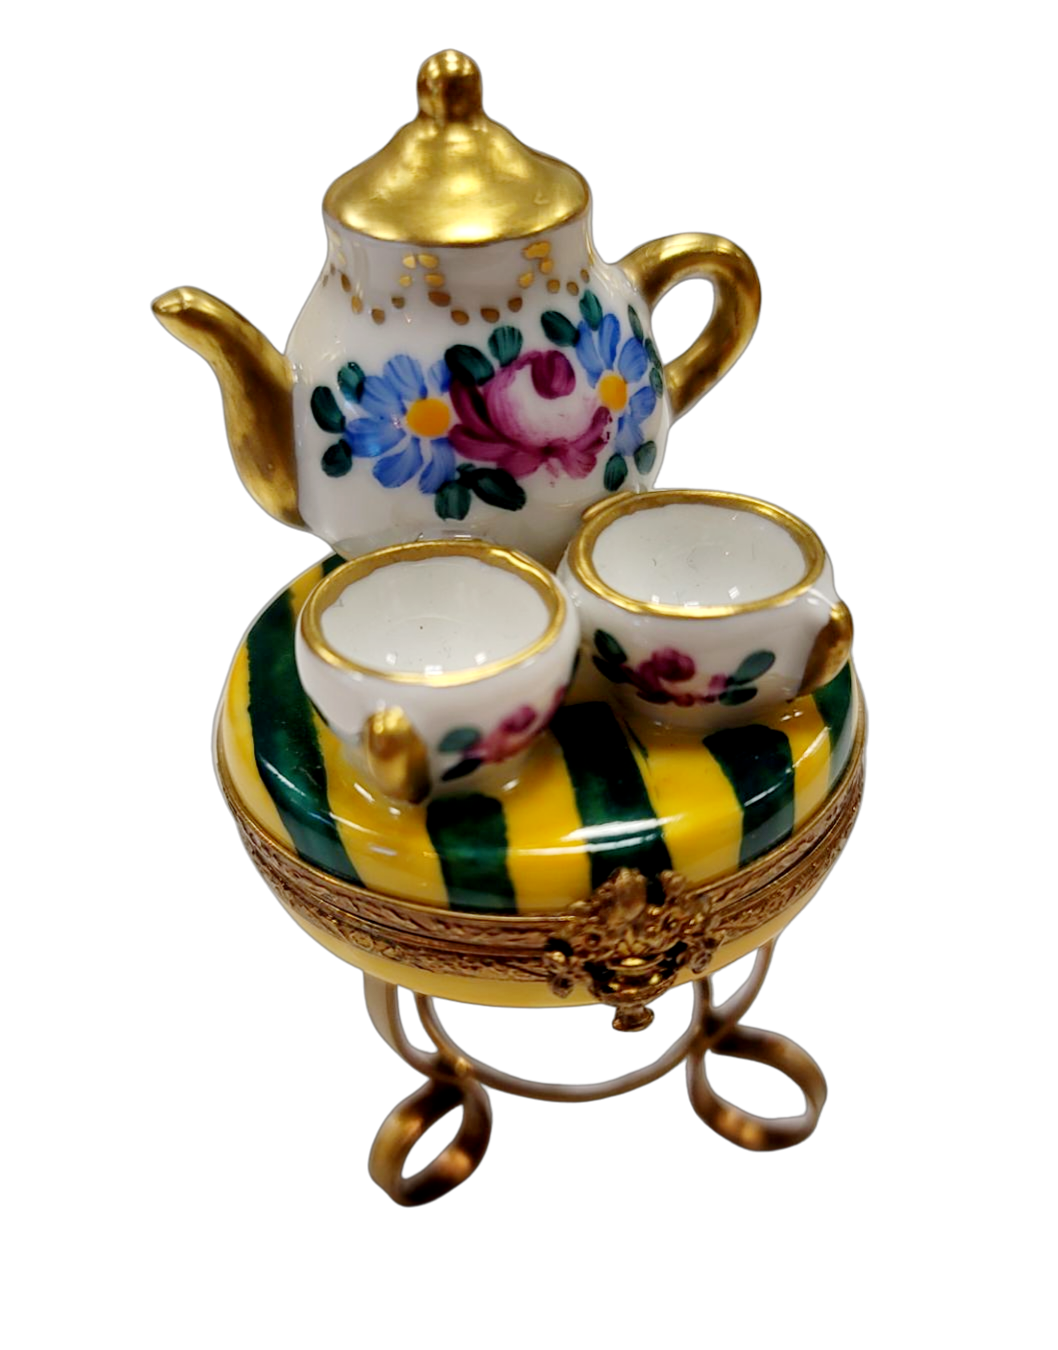 Tea set Teapot and Cups on Table